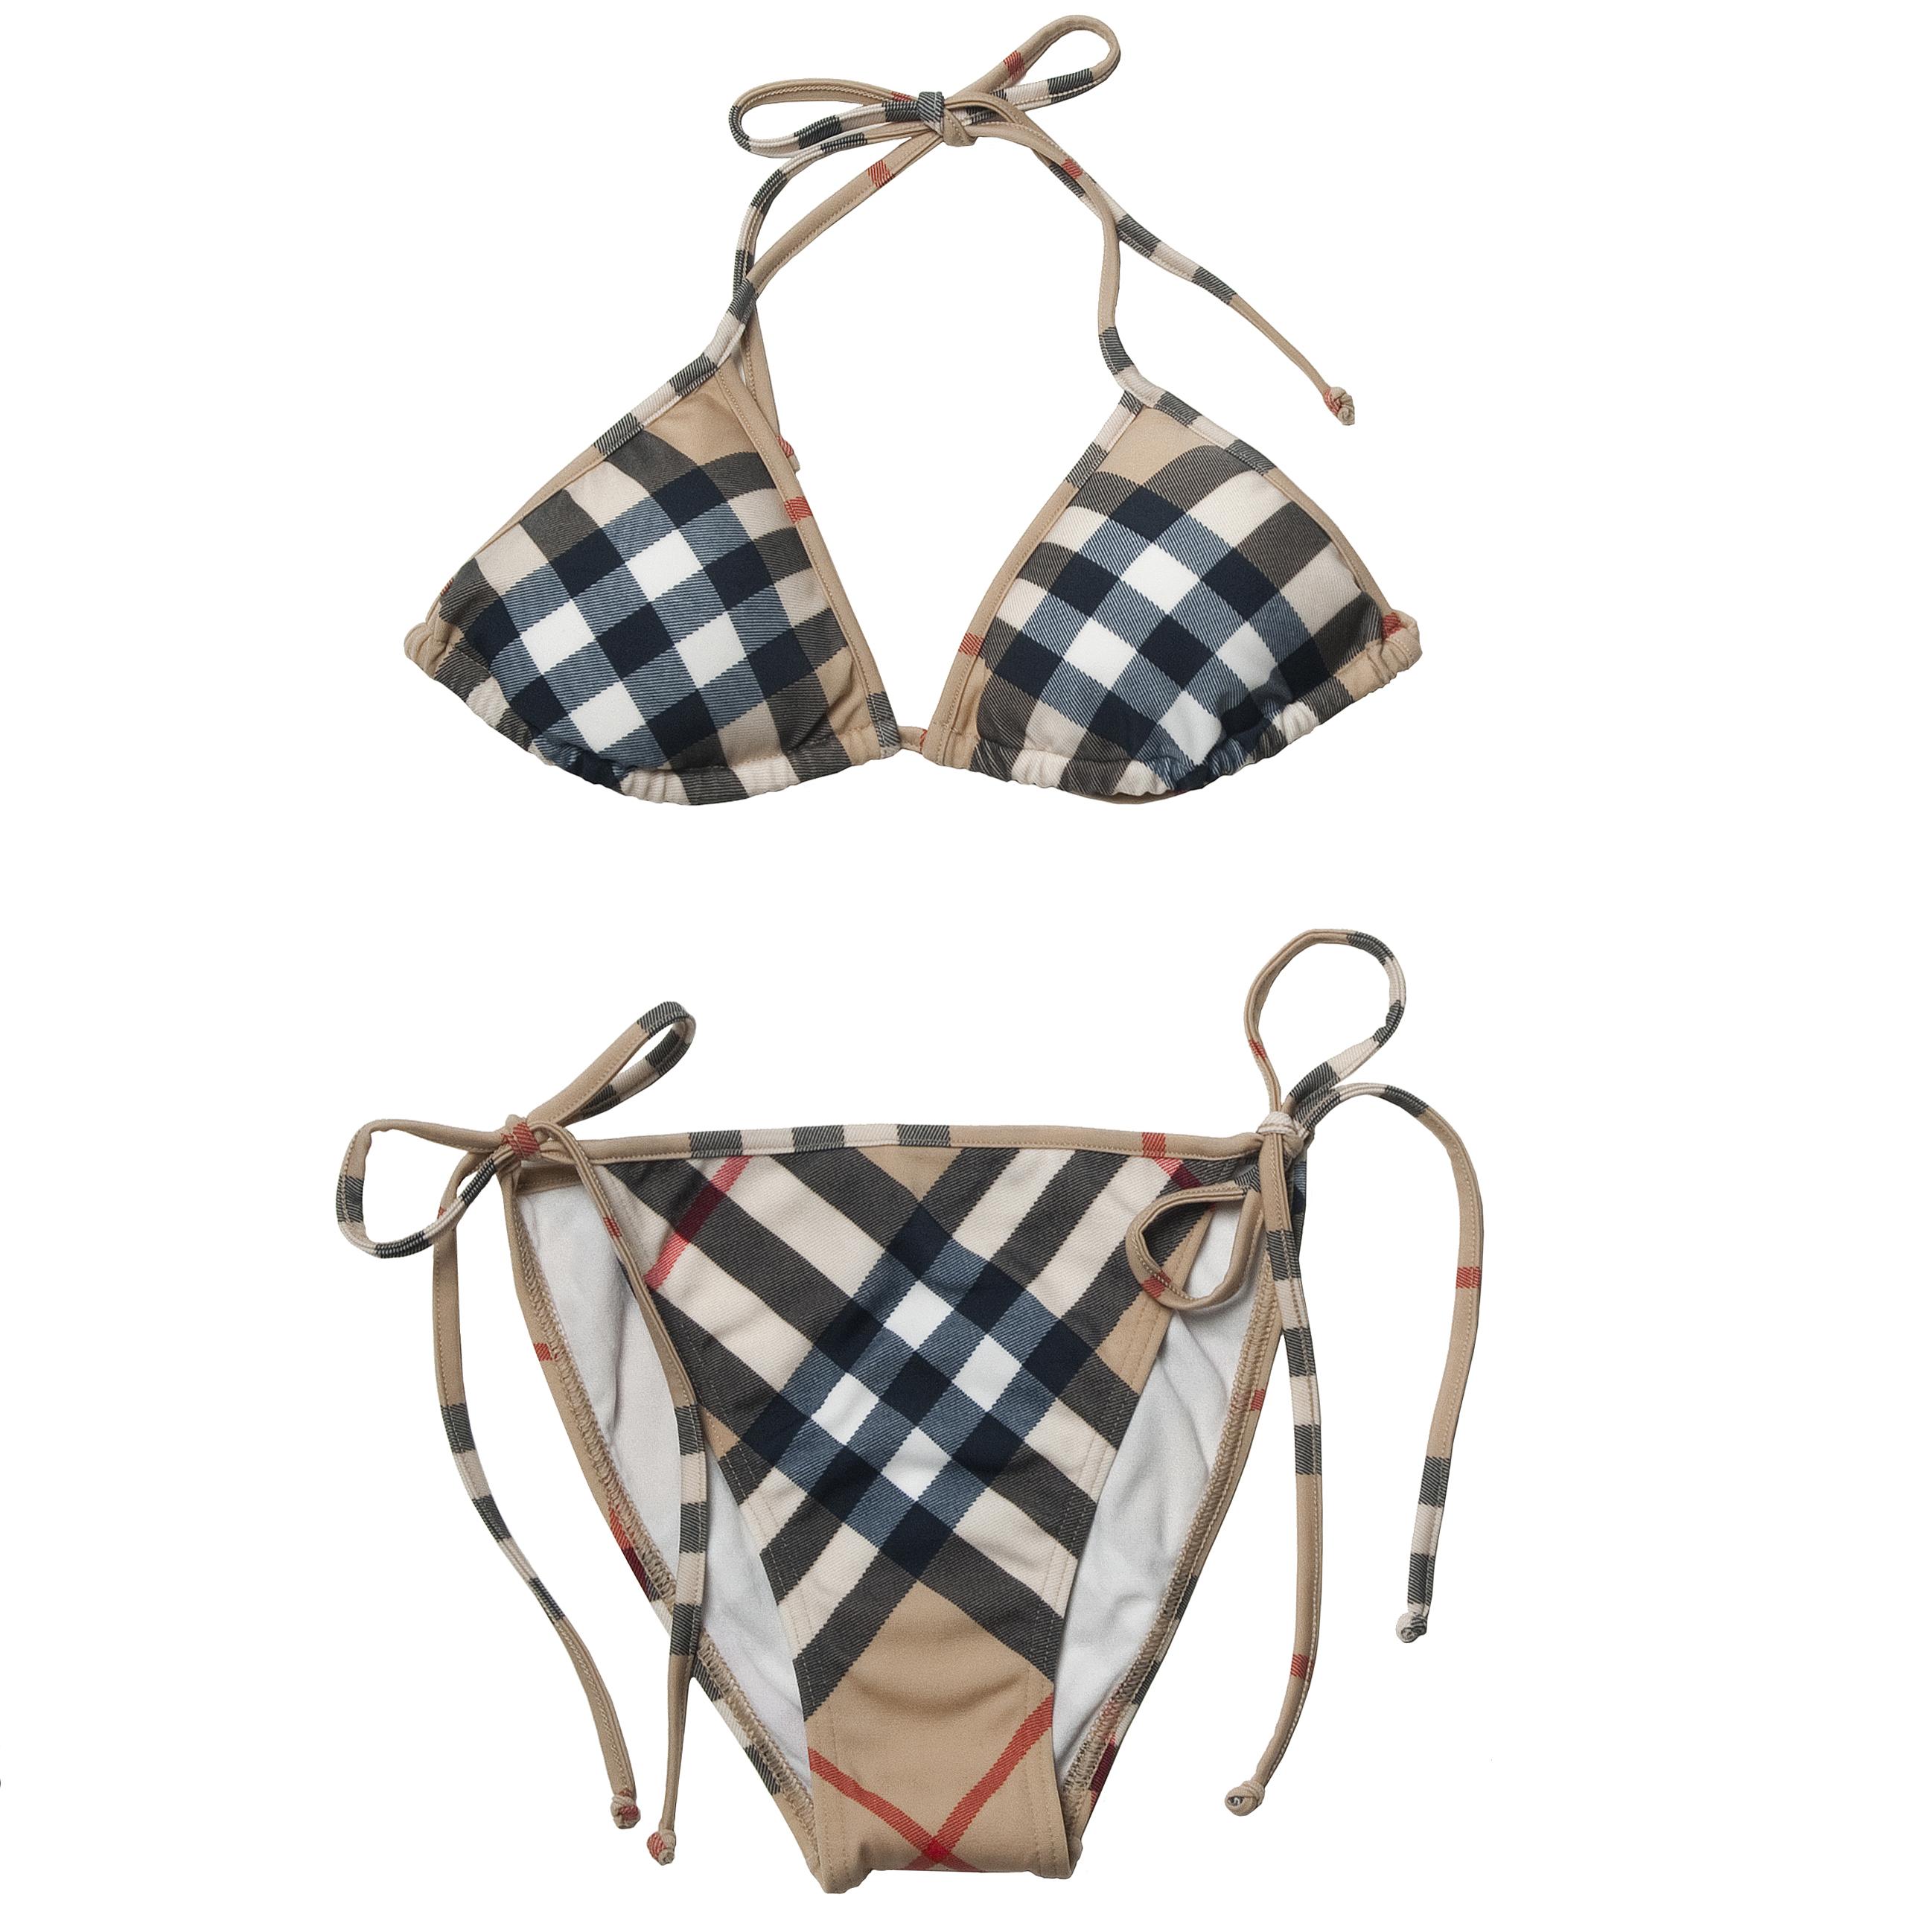 burberry swimsuit for sale